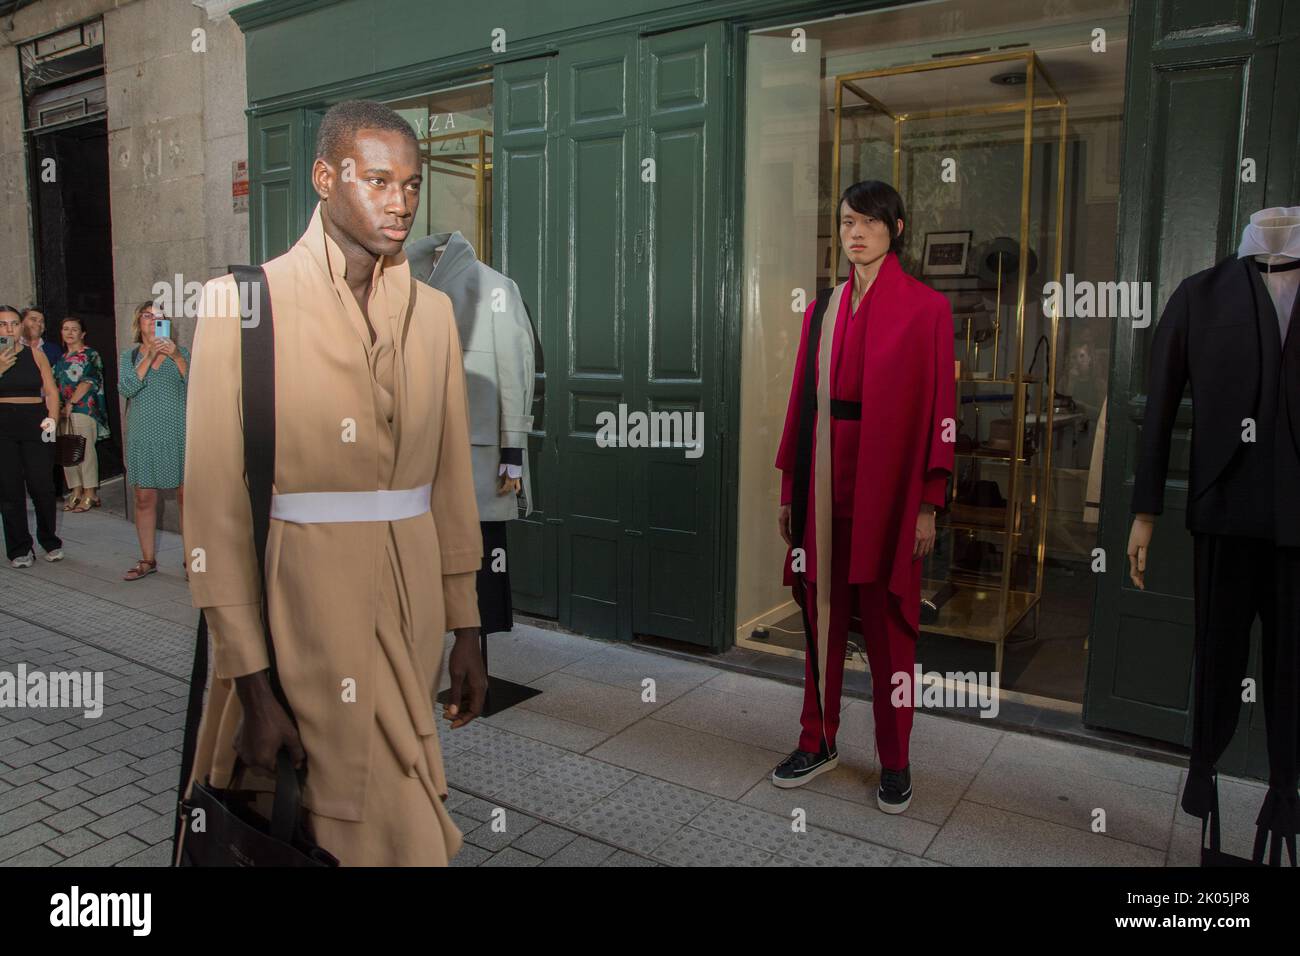 Oteyza has presented at Paris Fashion Week®. The models have left the Oteyza store to parade in Piamonte street, an urban event to show their new proposals that link Spanish High Craftsmanship with luxury streetwear. Stock Photo